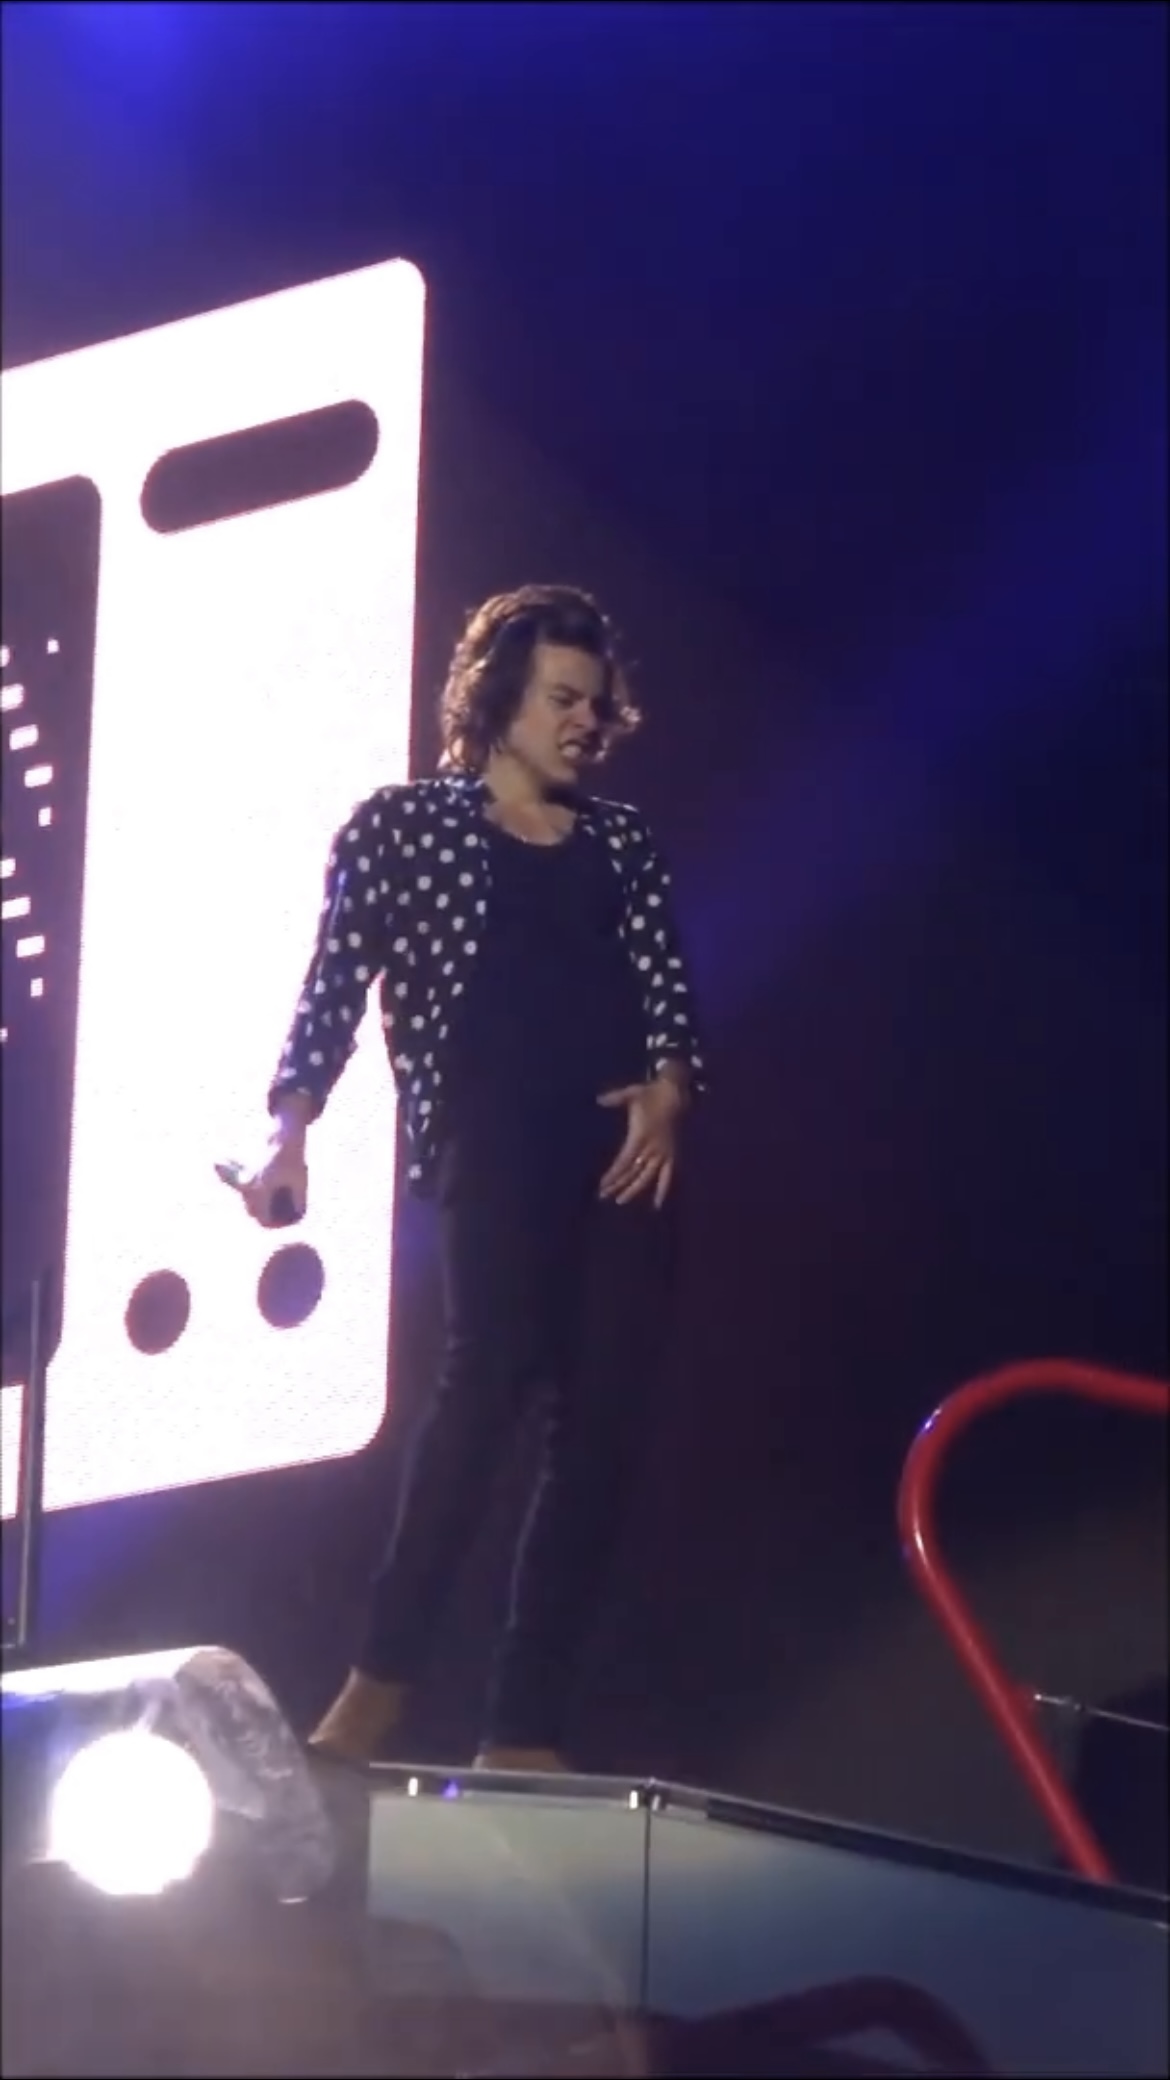 Harry Styles rubbing his bulge during his concert